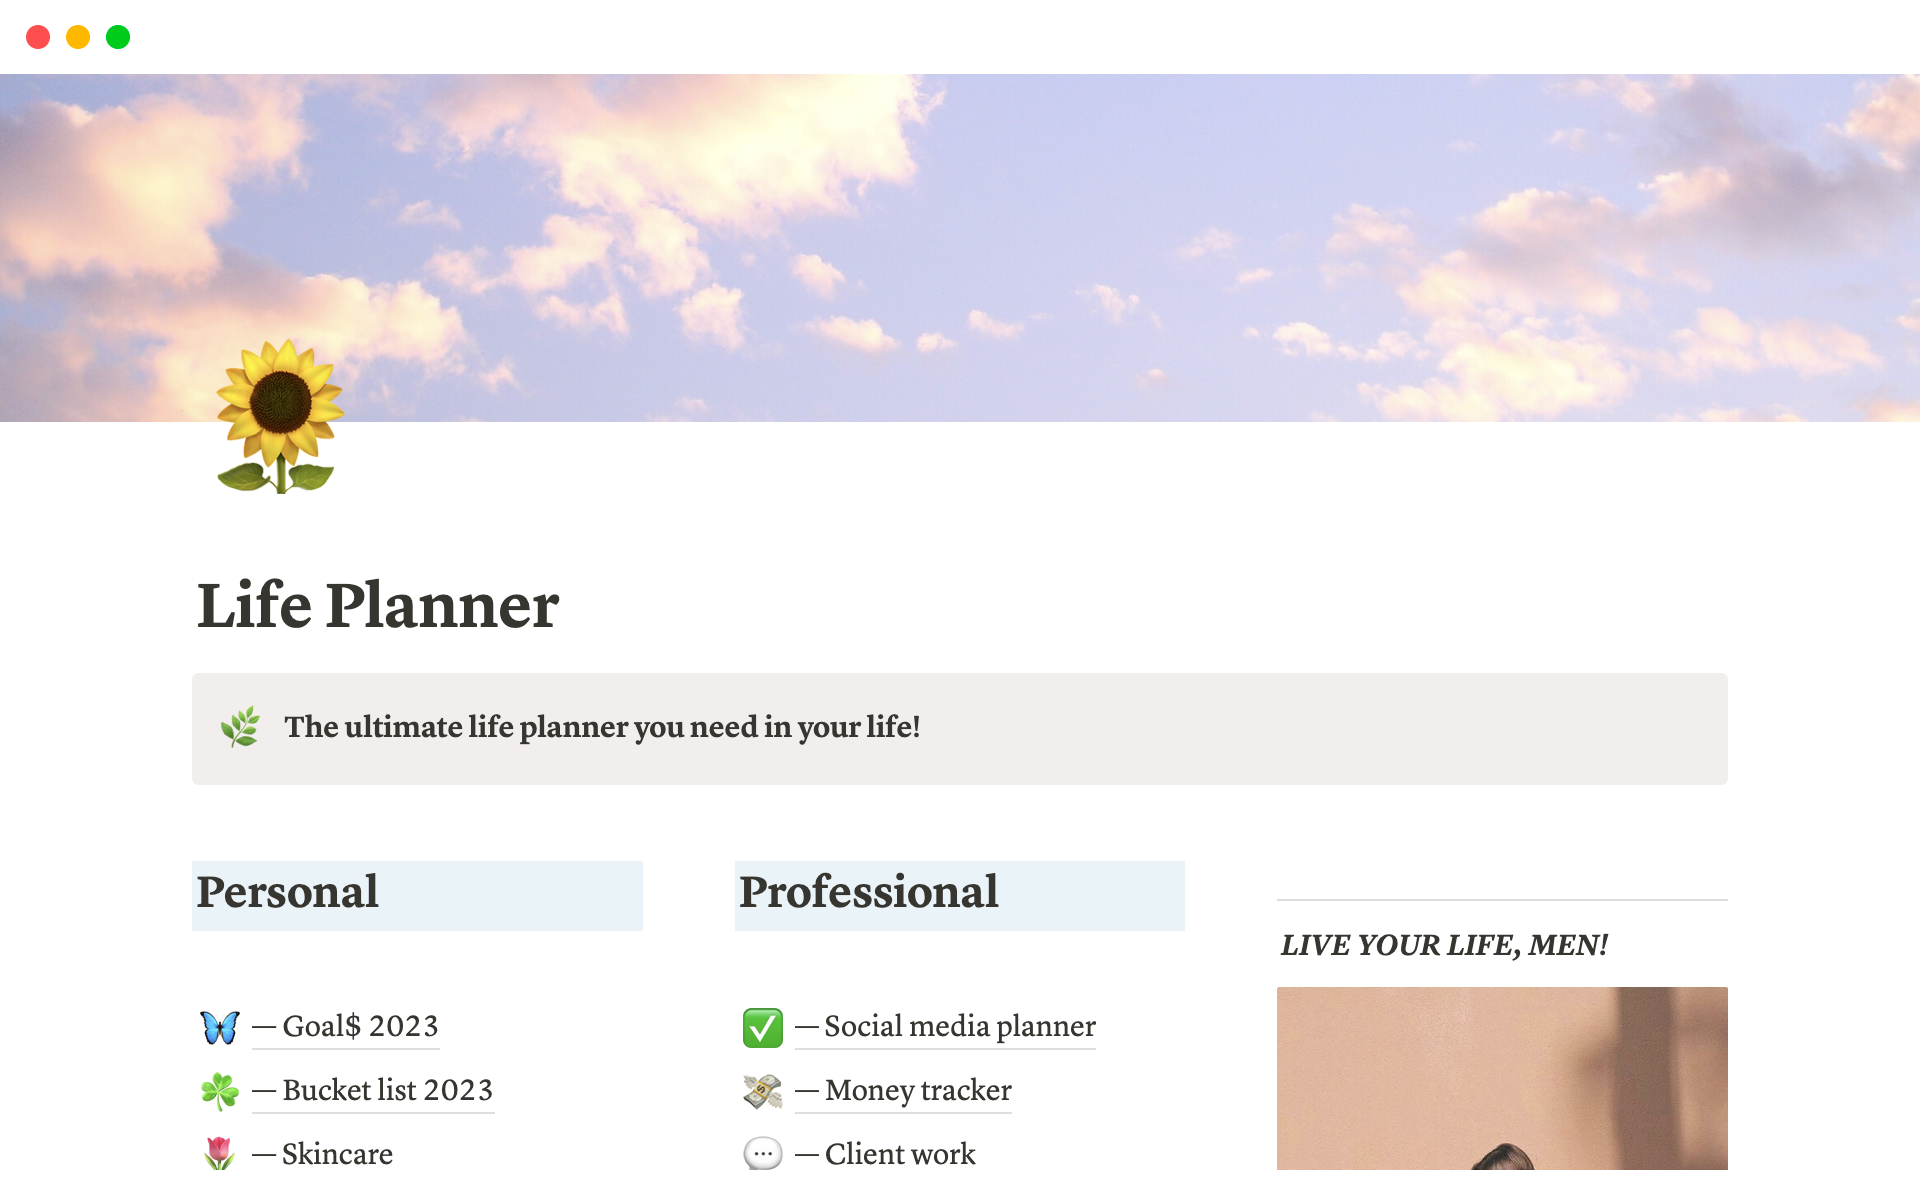 You can Plan your day-to-day Personal and Professional life with this aesthetic Life Planner